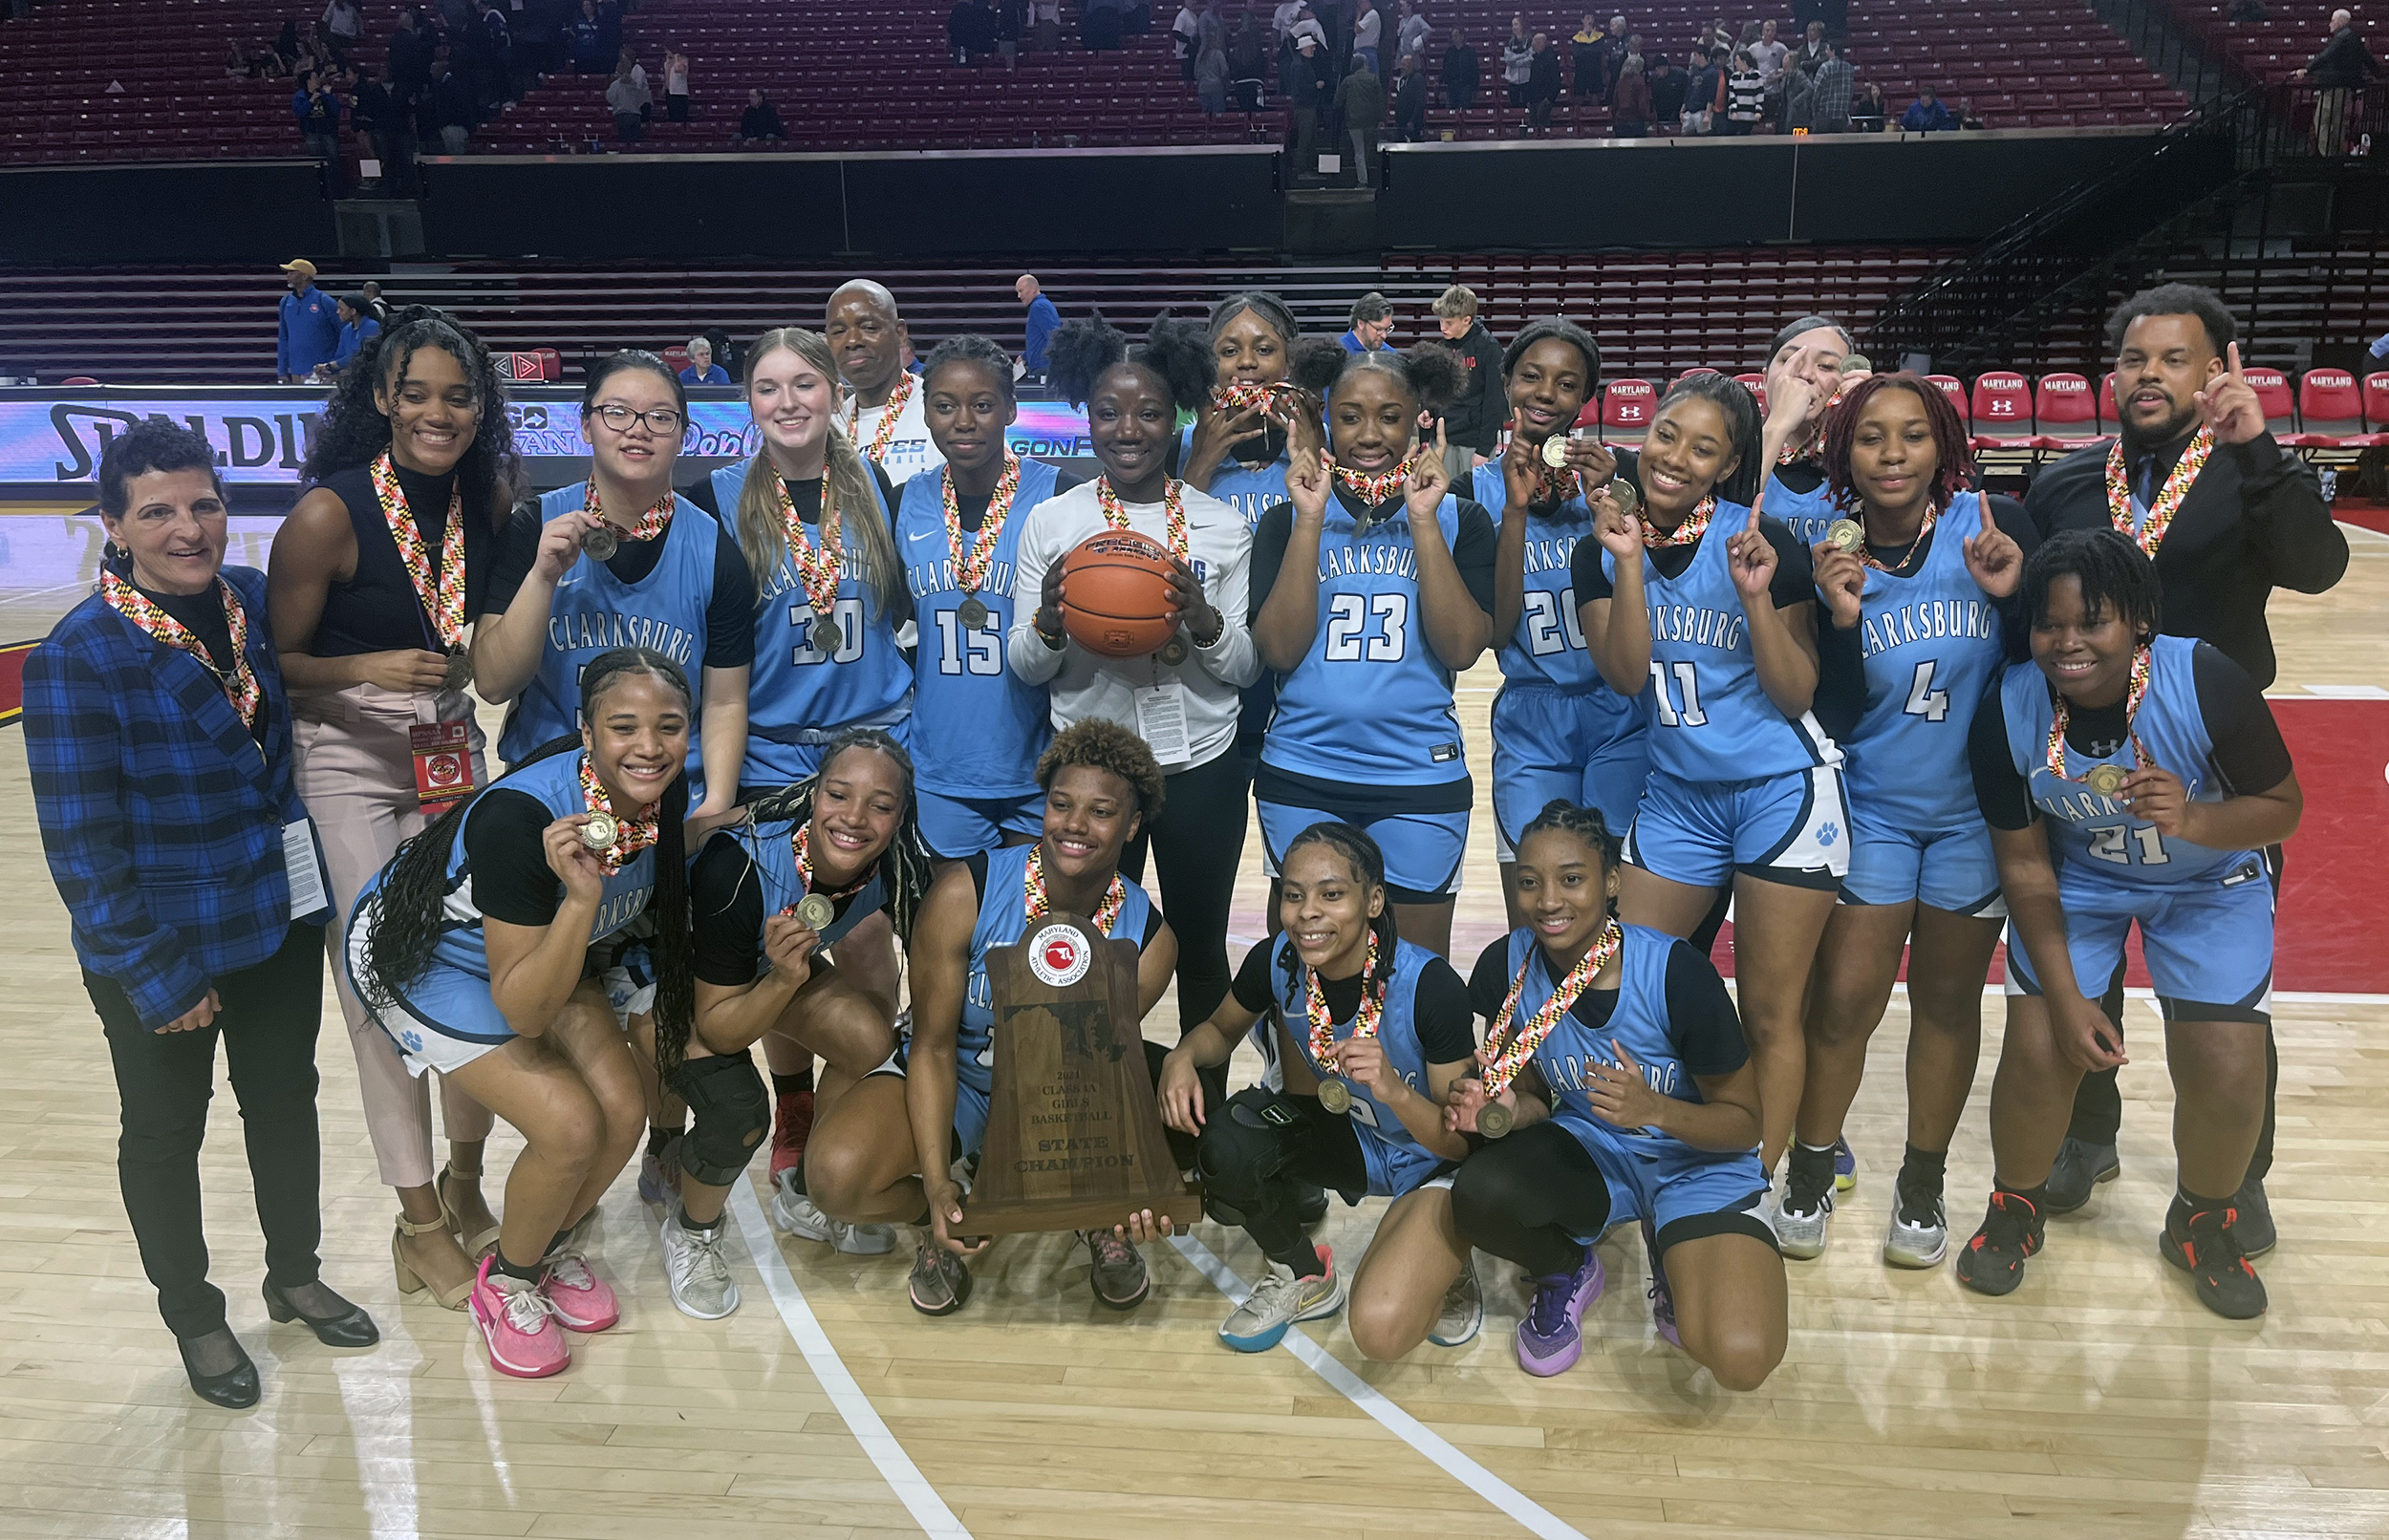 Clarksburg poses for a team photo with its first ever MPSSAA girls basketball state championship trophy.